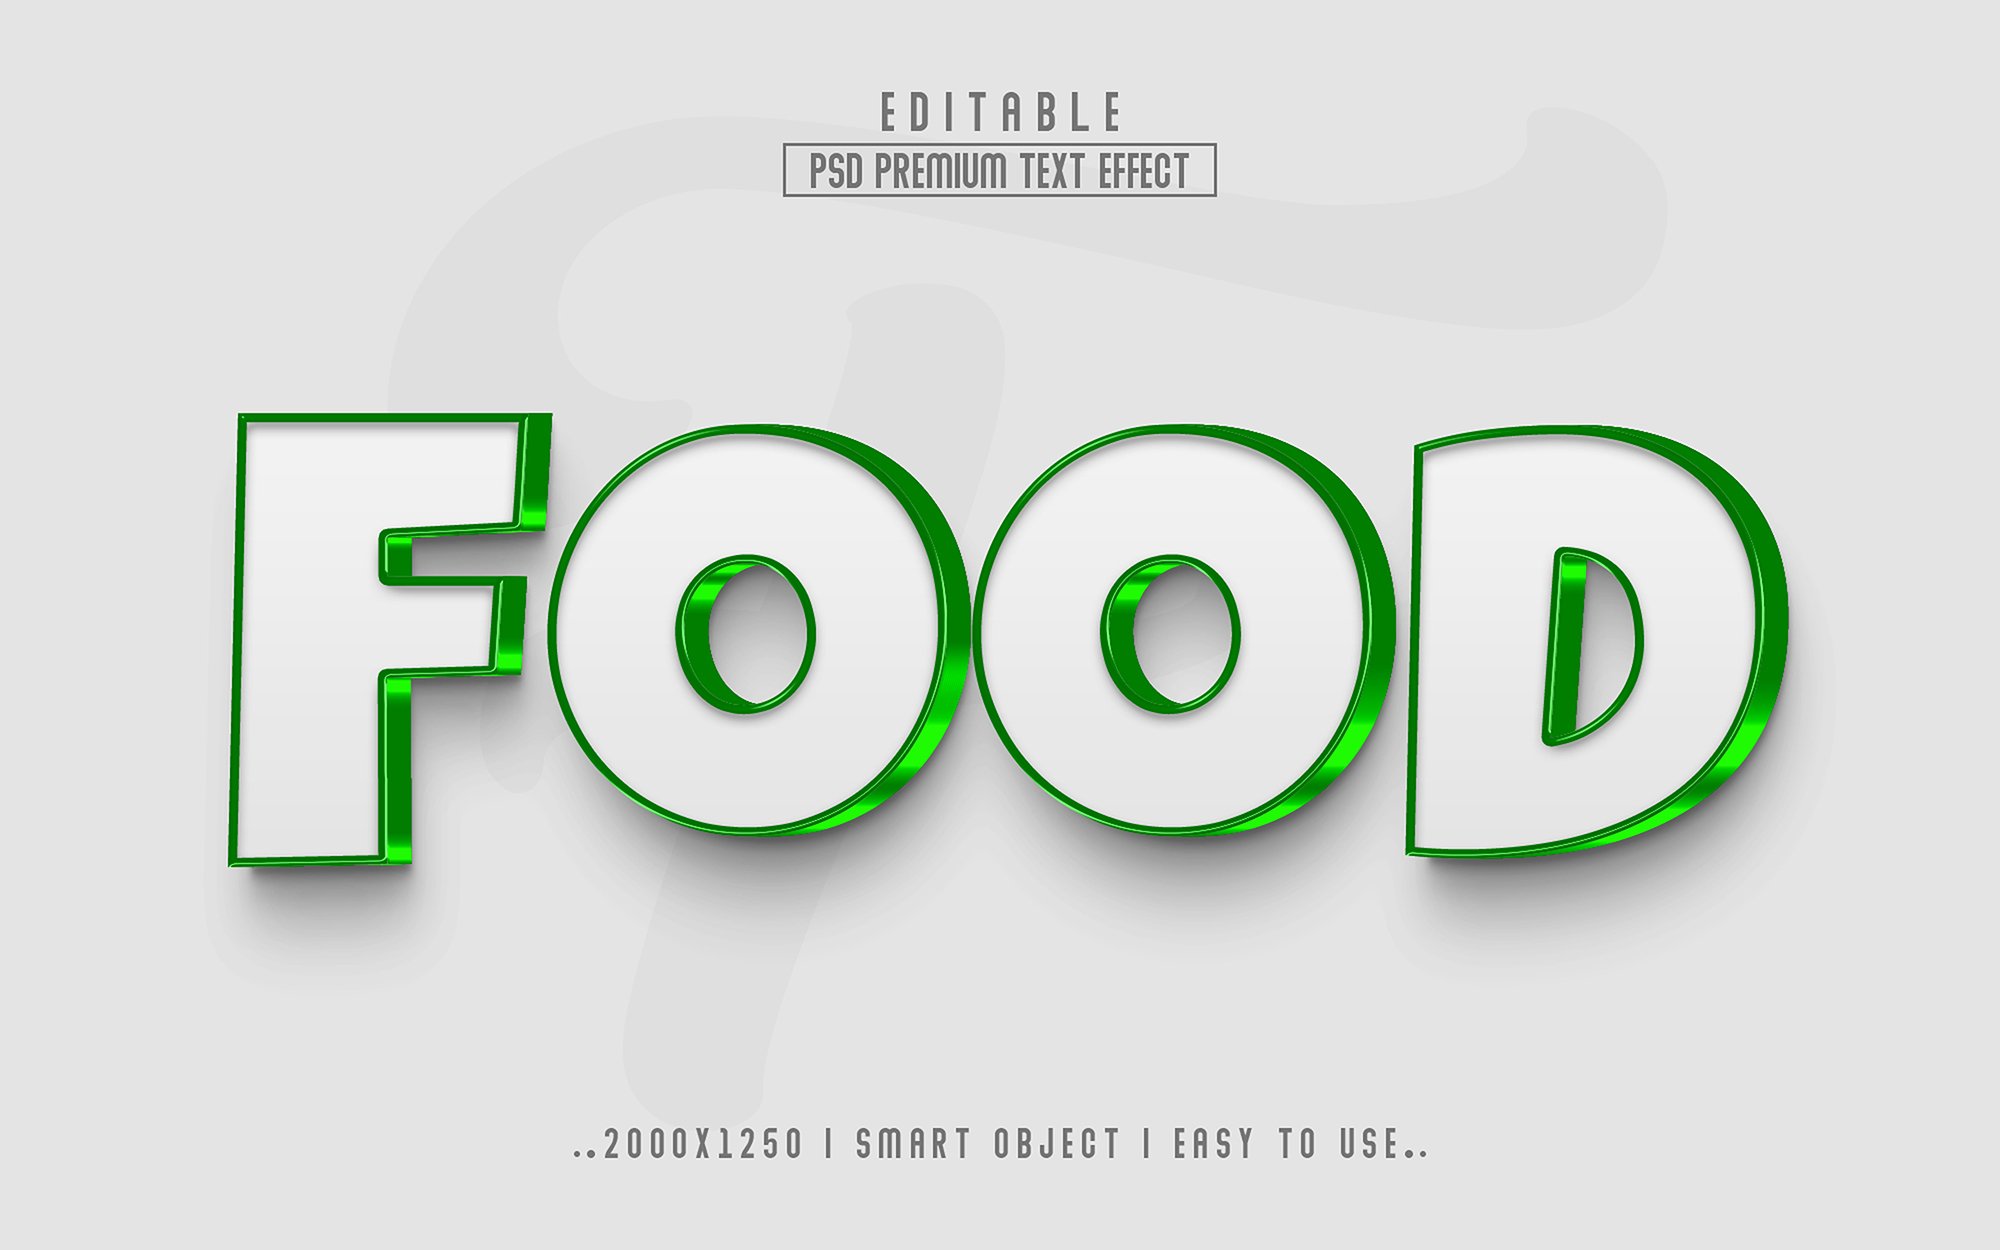 Food 3D Editable Text Effect Stylecover image.